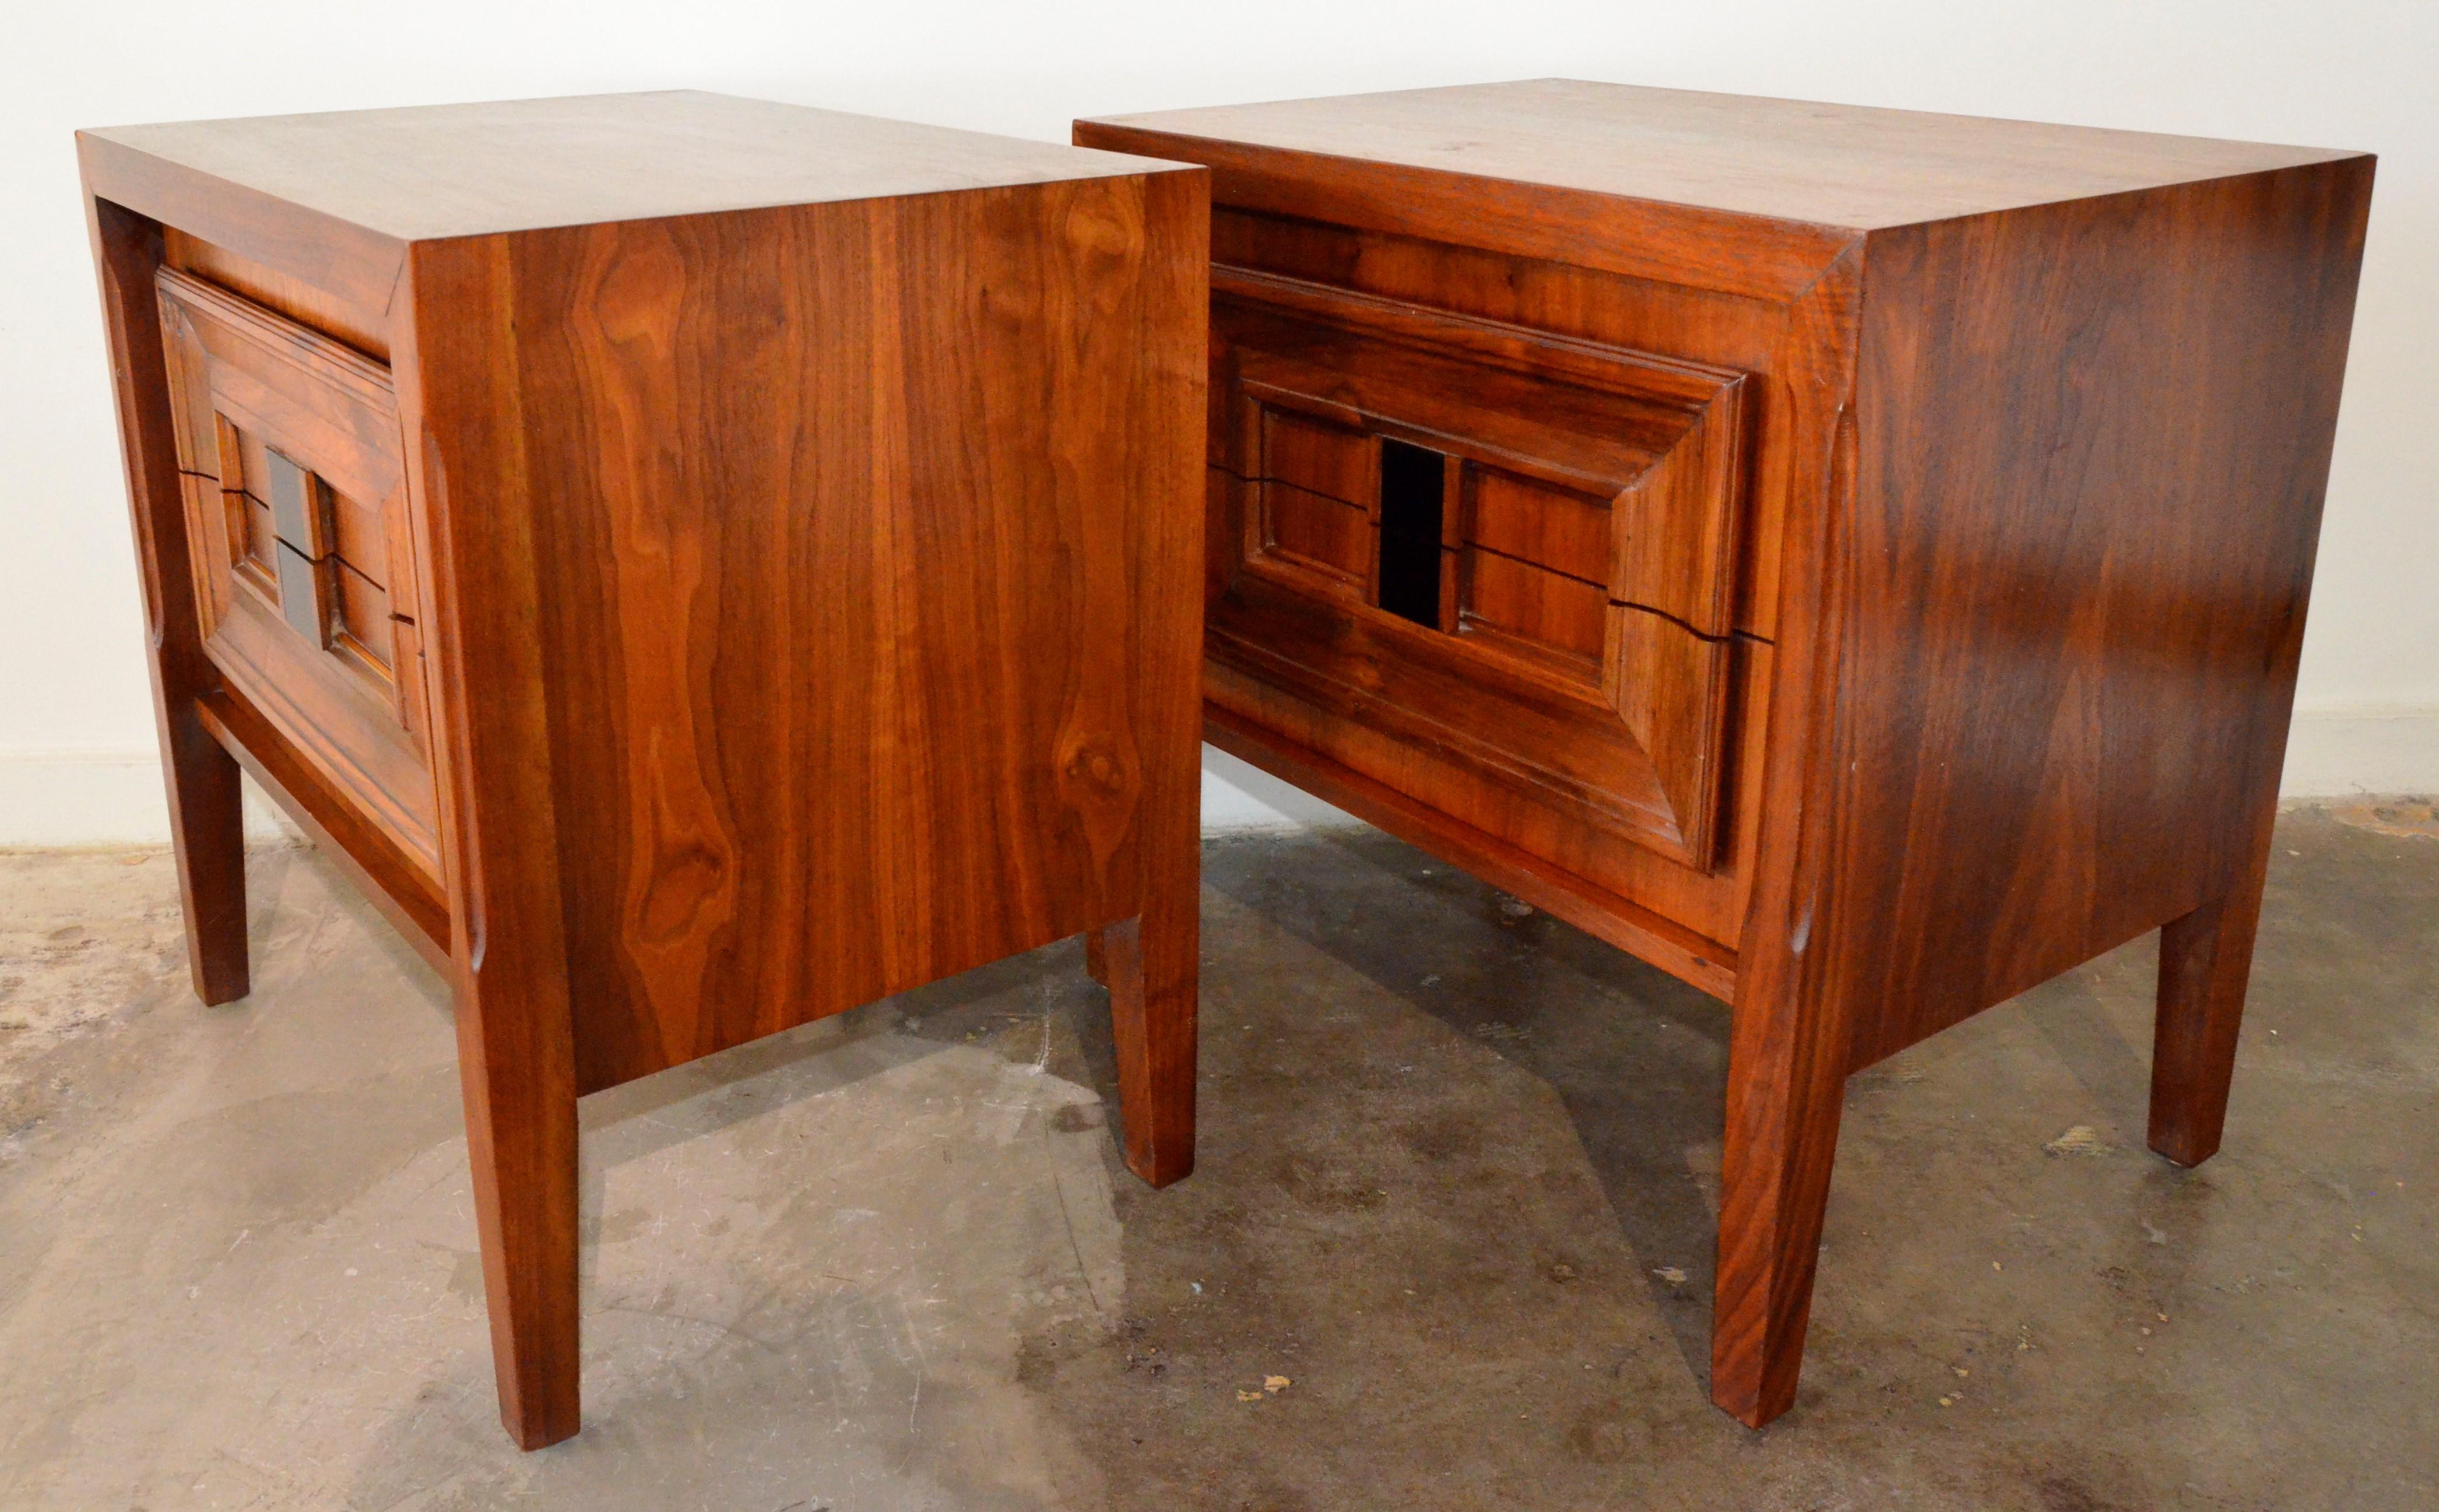 Offered are a pair of Mid-Century Modern Brutalist walnut veneer and burl wood bedside night stands / side or end tables. The bedside tables are box two-drawer cabinets on raised legs. The burl wood on these bedside stands / tables make for a